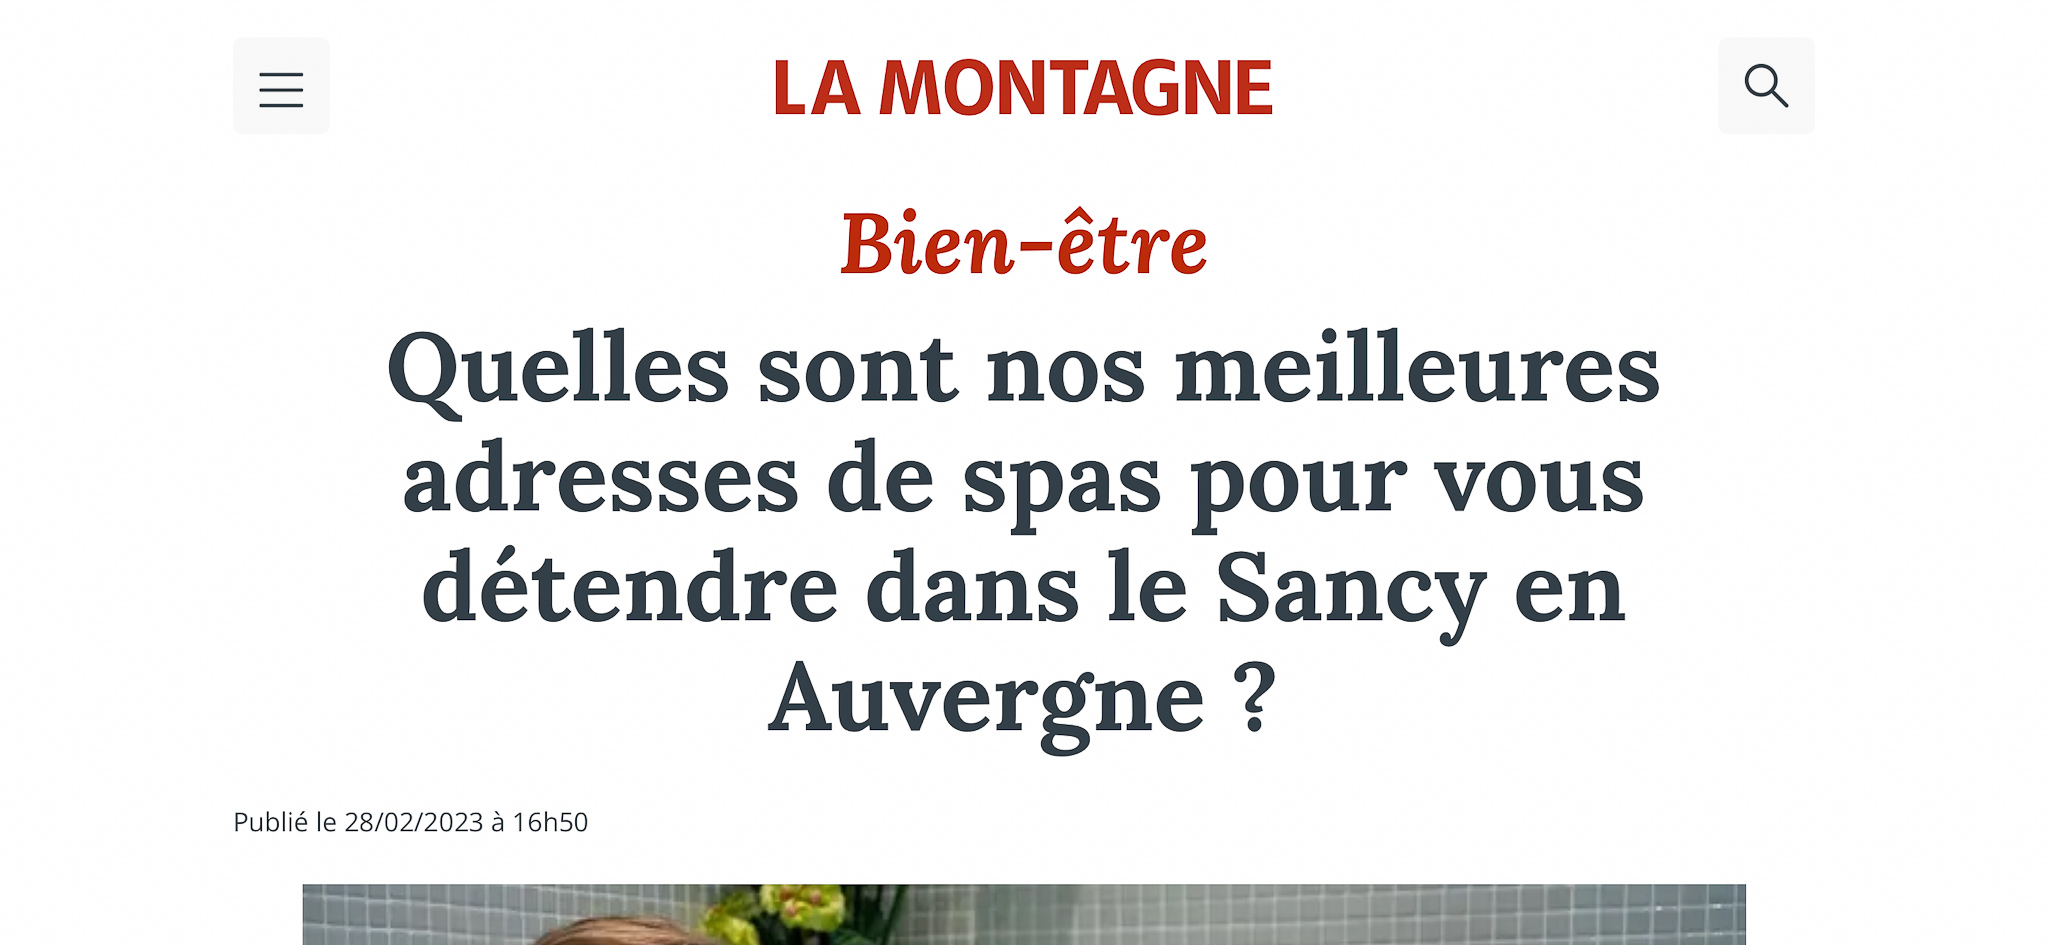 La Montagne - What are the Best Spa Addresses in Sancy in Auvergne